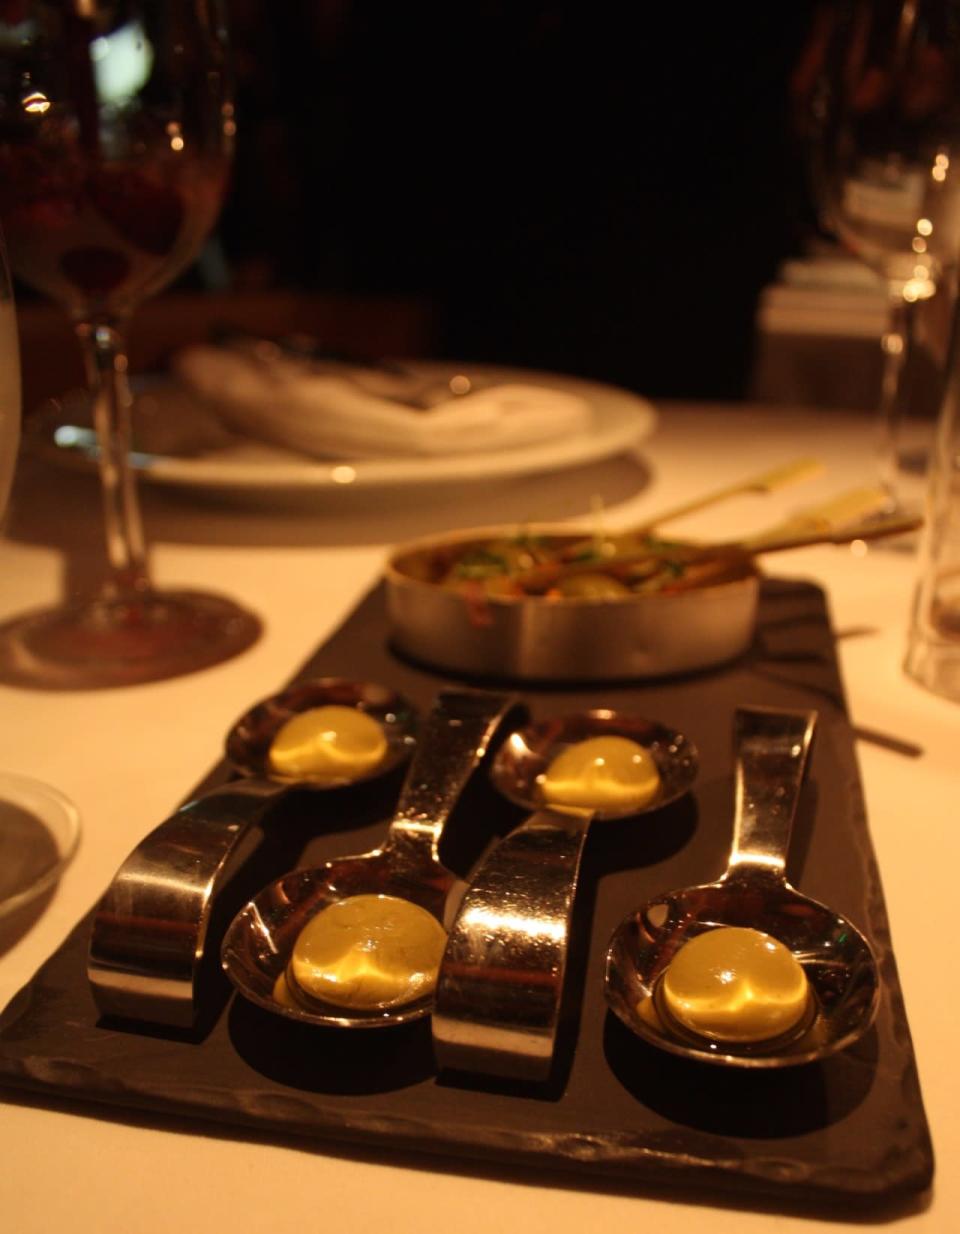 Olives, served two ways: traditional and modern.